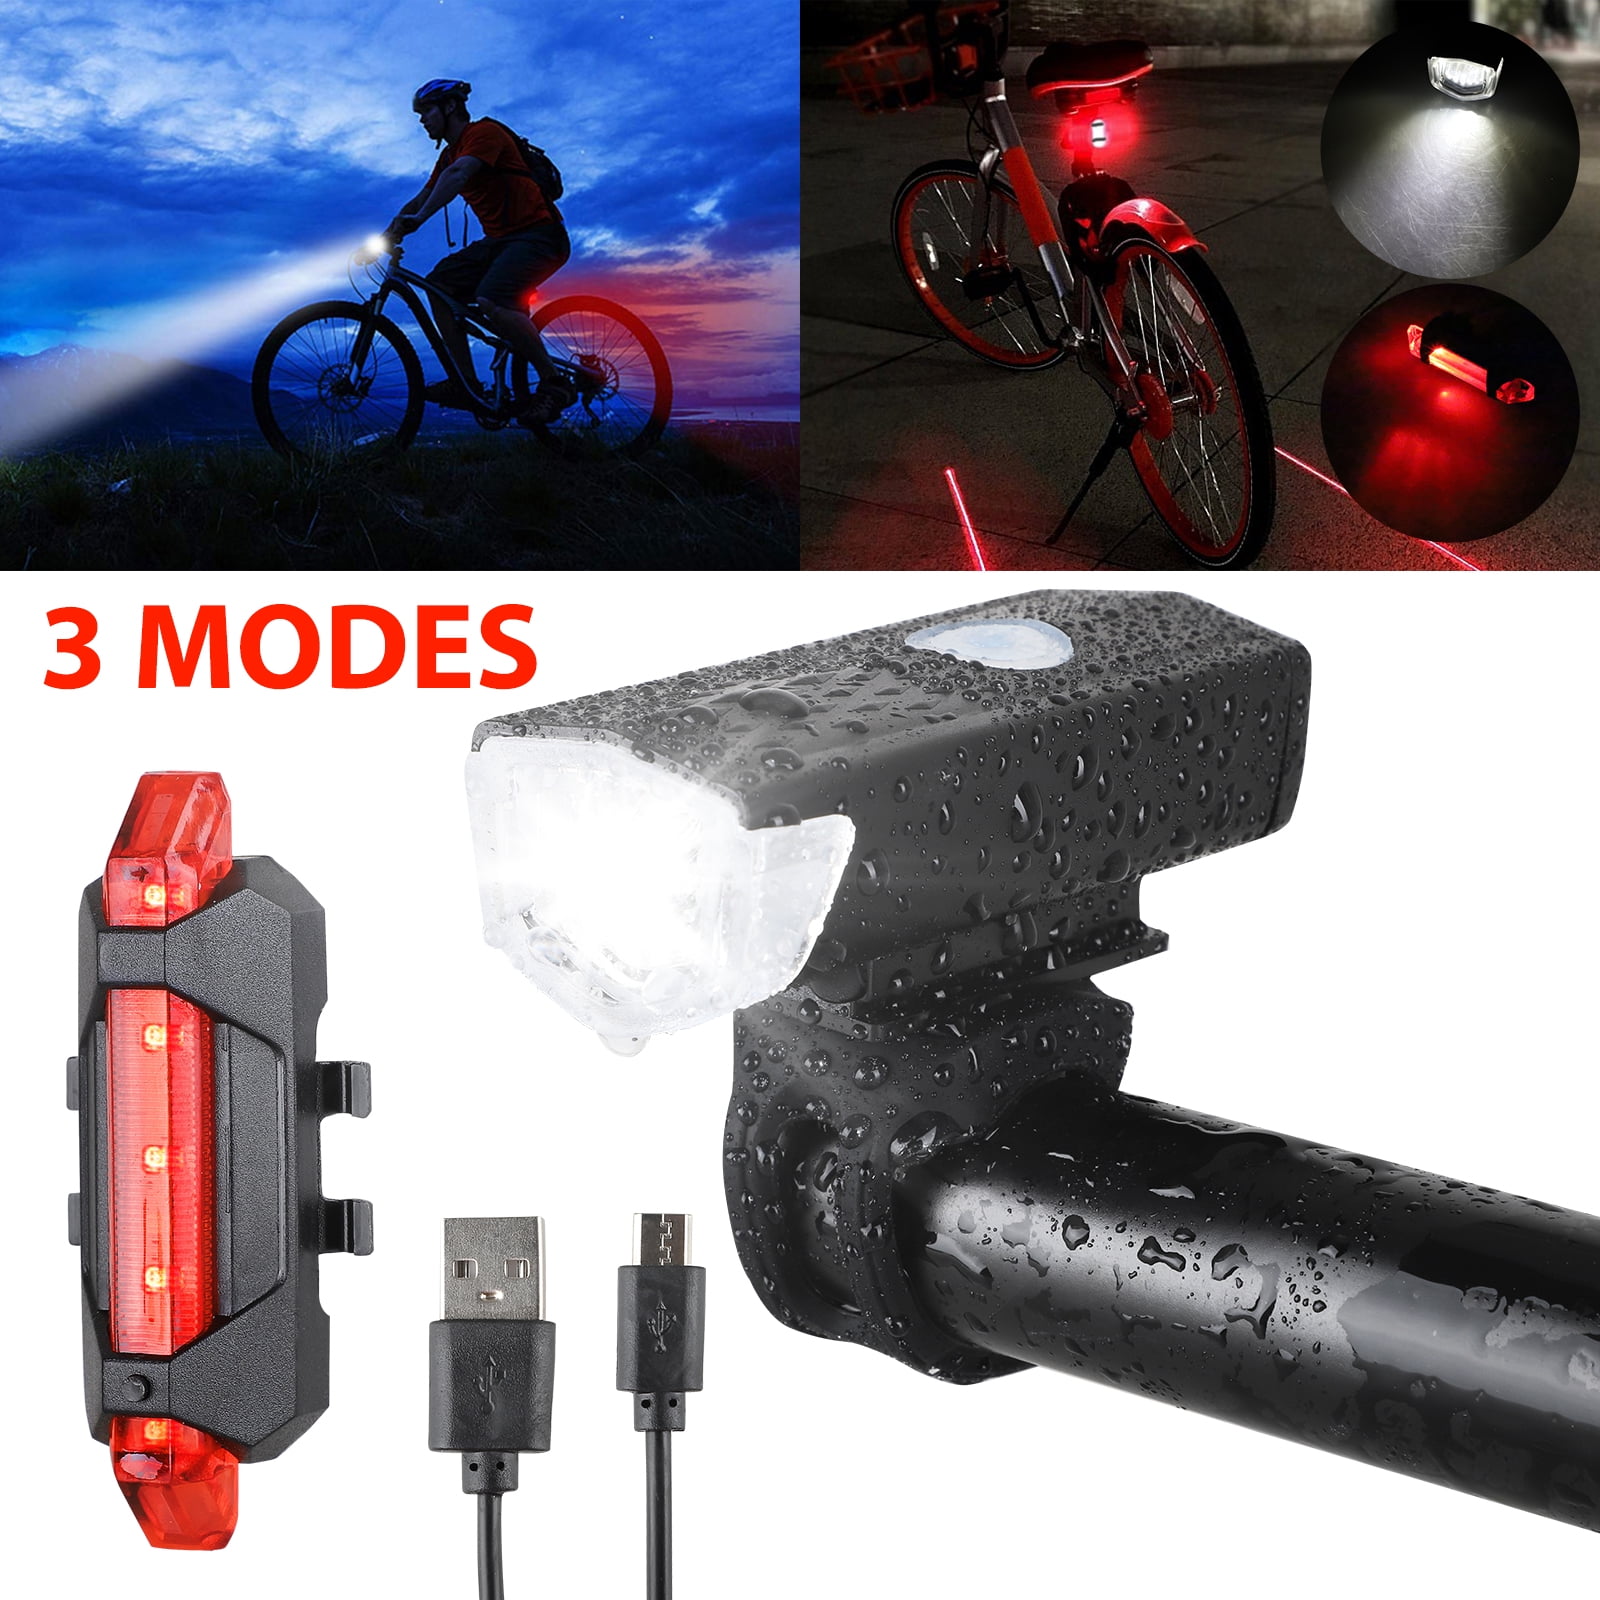 Wireless USB Rechargeable LED Bicycle Cycle Bike Headlight &Taillight Waterproof 